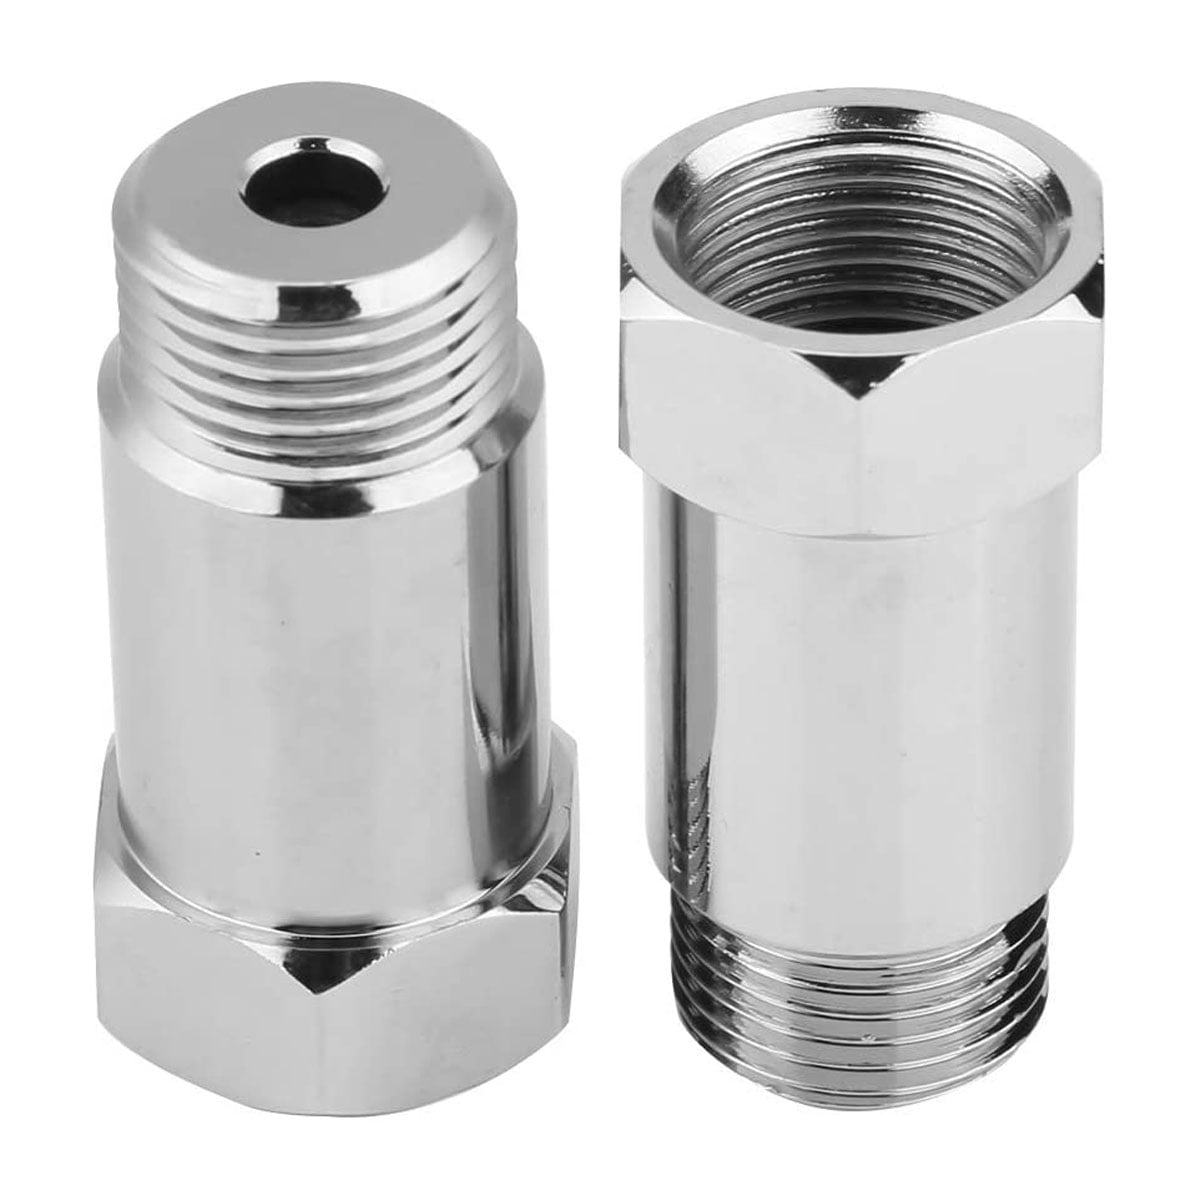 USSIGN 2Pcs M18x1.5 O2 Extension Extender Spacer Adapter